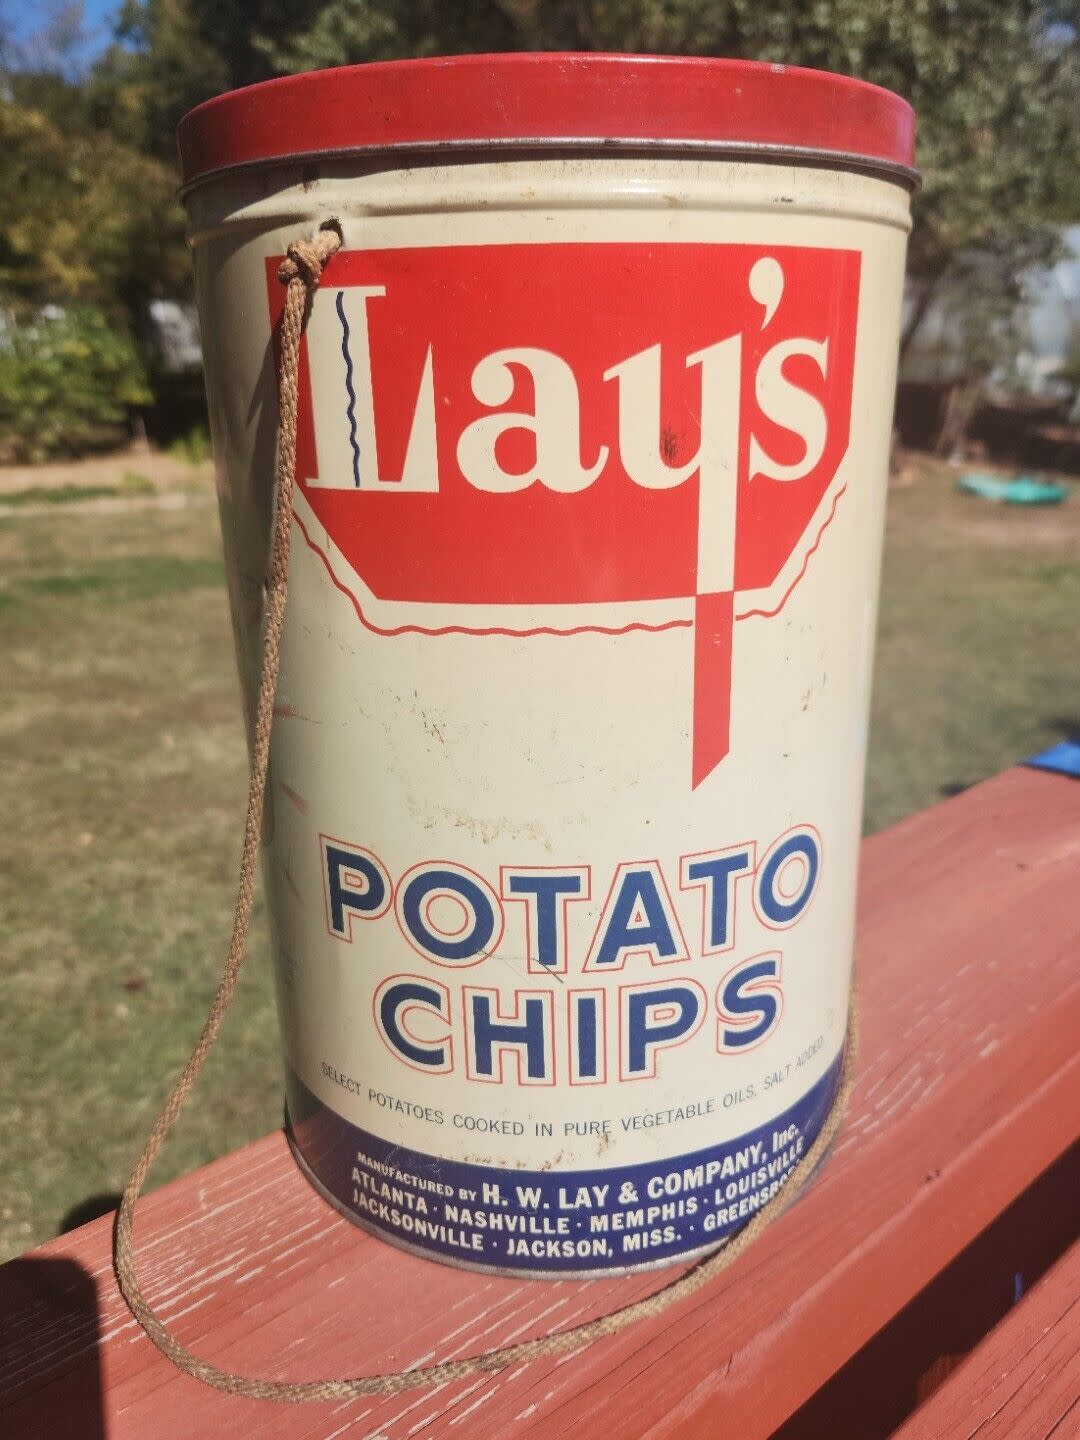 Vintage Lay's potato chips 1 lb. tin can with lid, white can with red and blue lettering and details, red lid, on a brick red fence with a lawn and trees blurred in the background